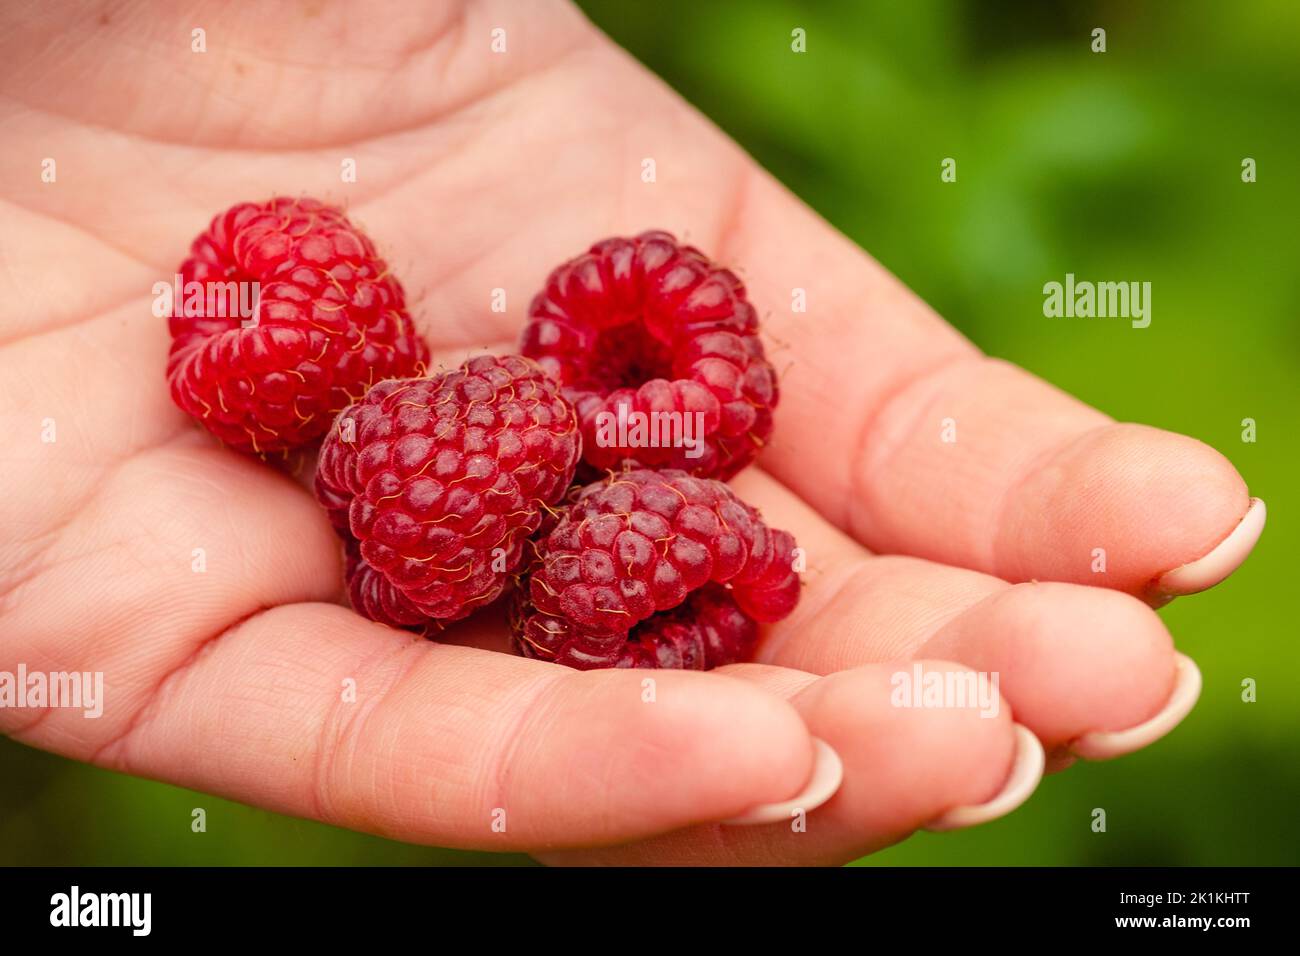 Beautiful red-fruited ripe raspberries ready to eat in the hand of a girl, close up Stock Photo